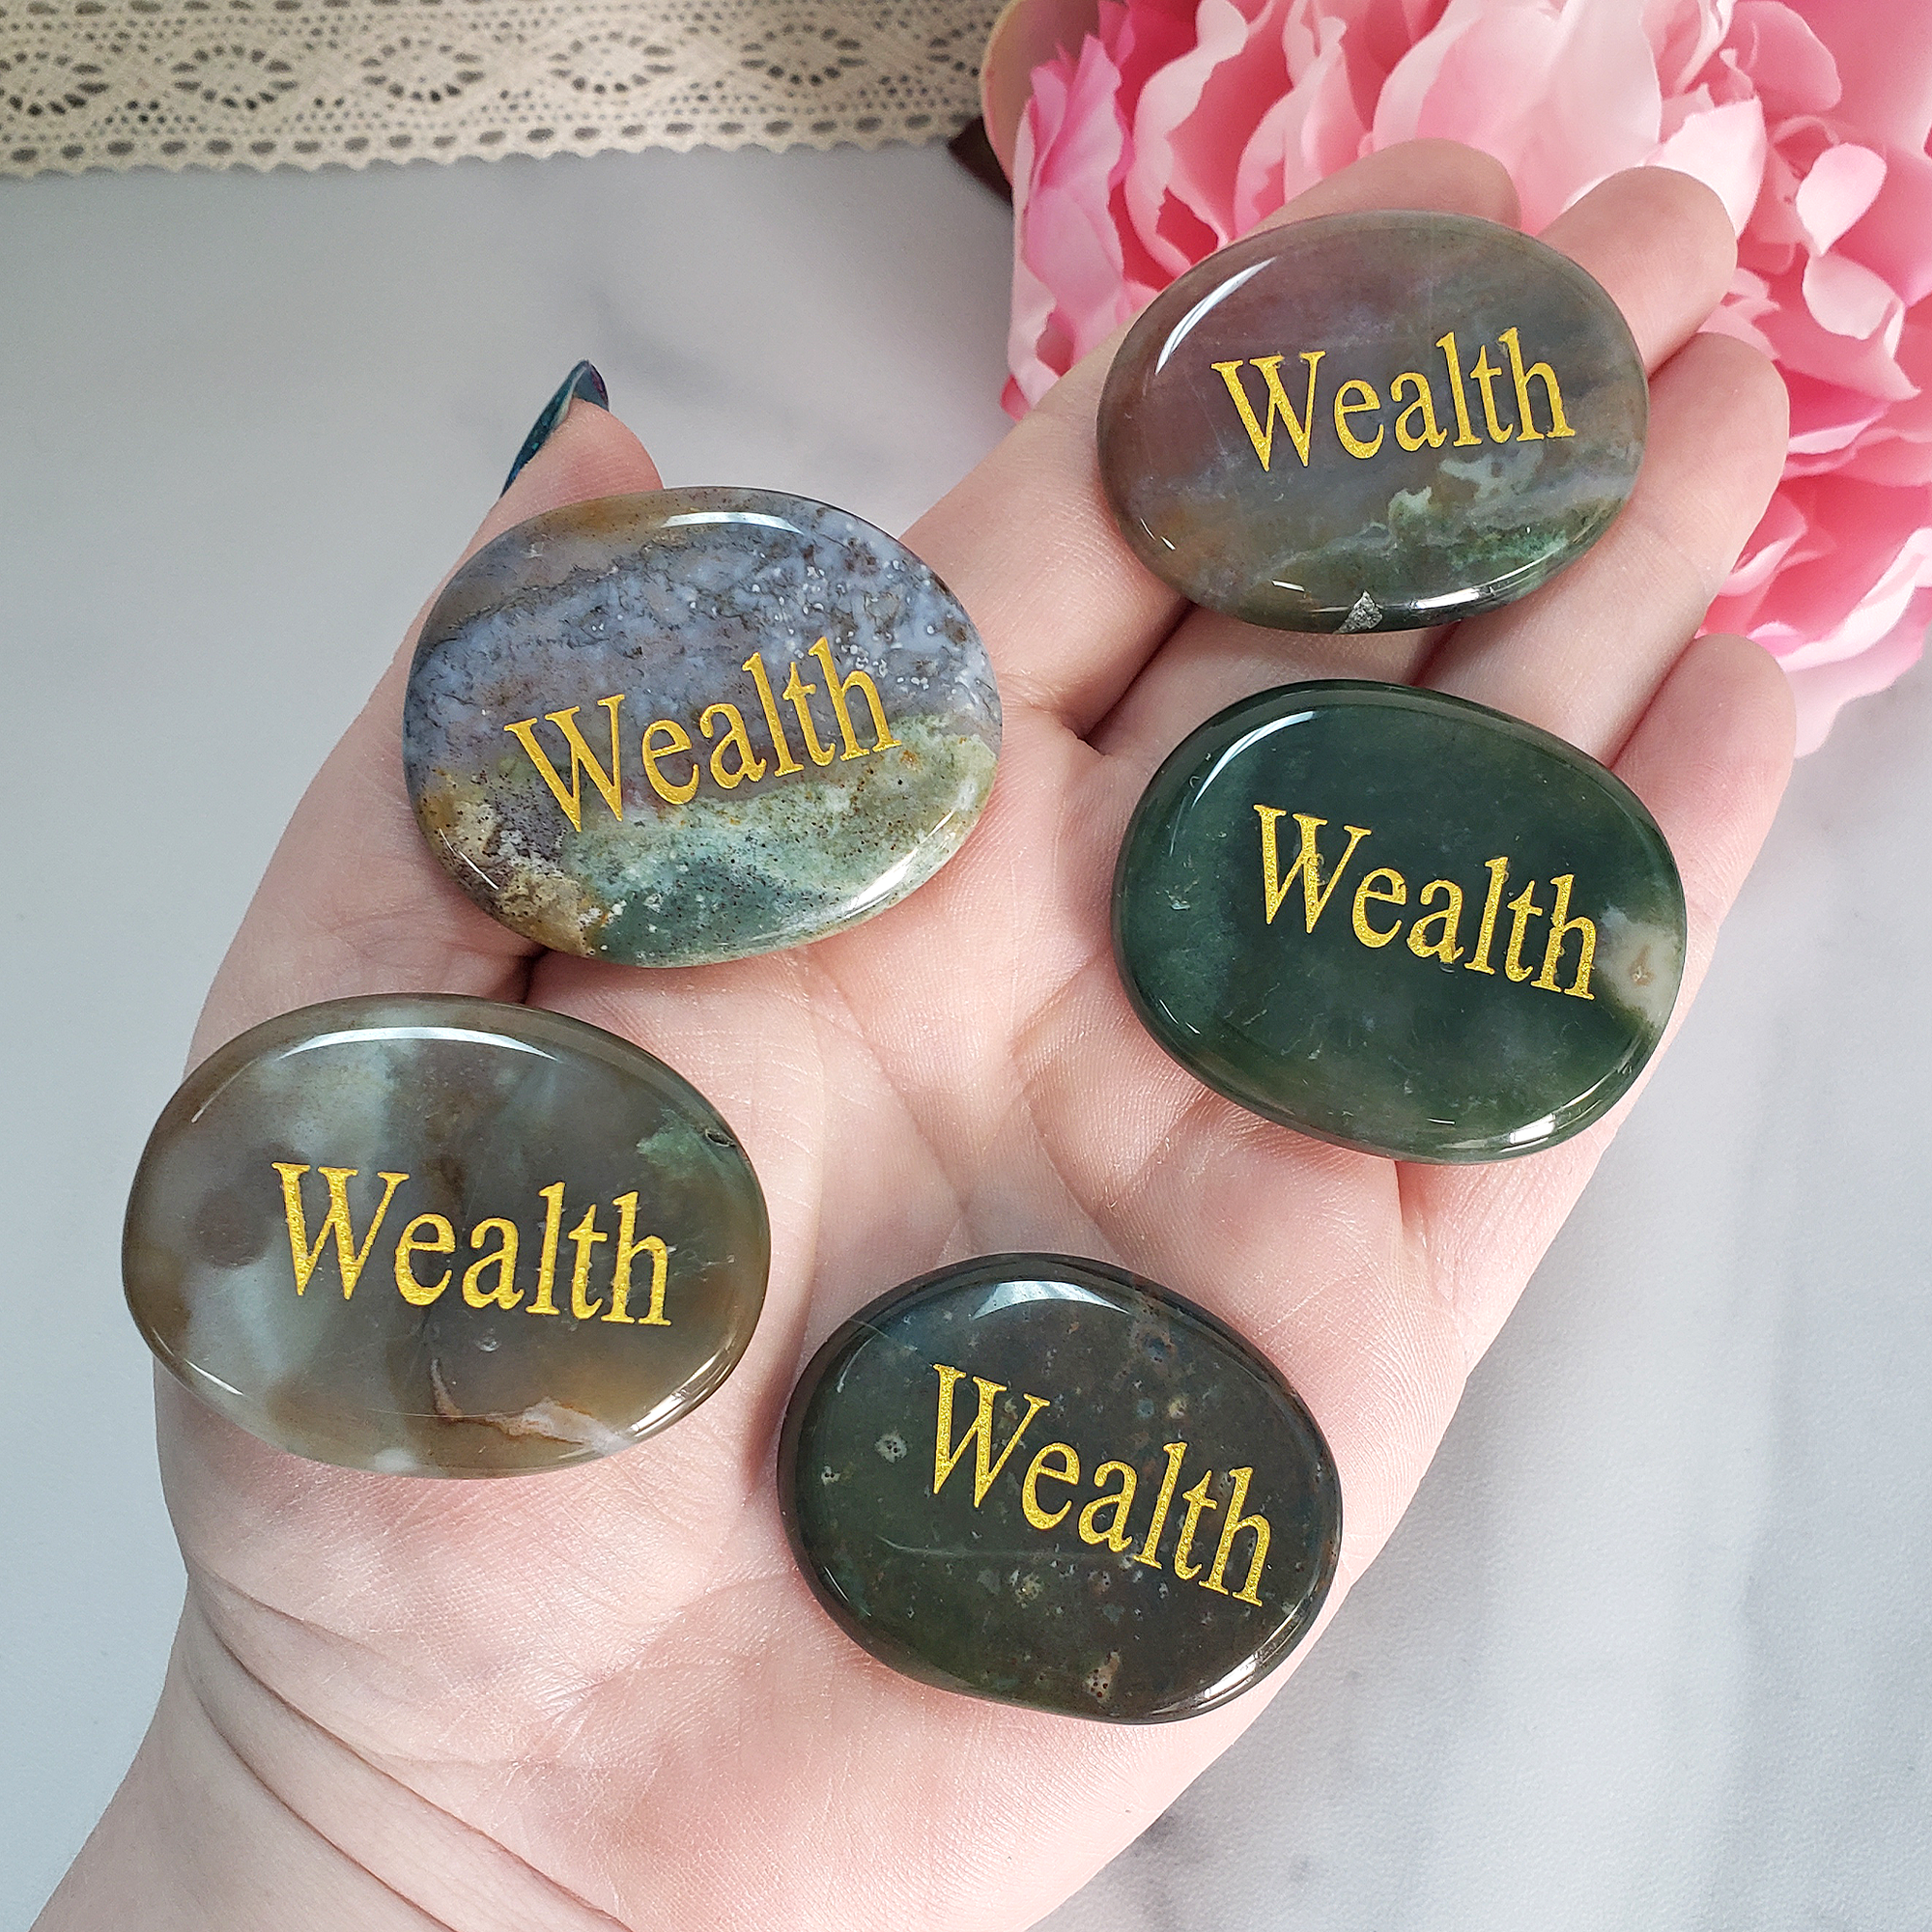 Wealth Affirmation Palm Stone | Crystal Worry Stone with "Wealth" Engraving - Moss Agate, Fancy Agate, Fancy Jasper